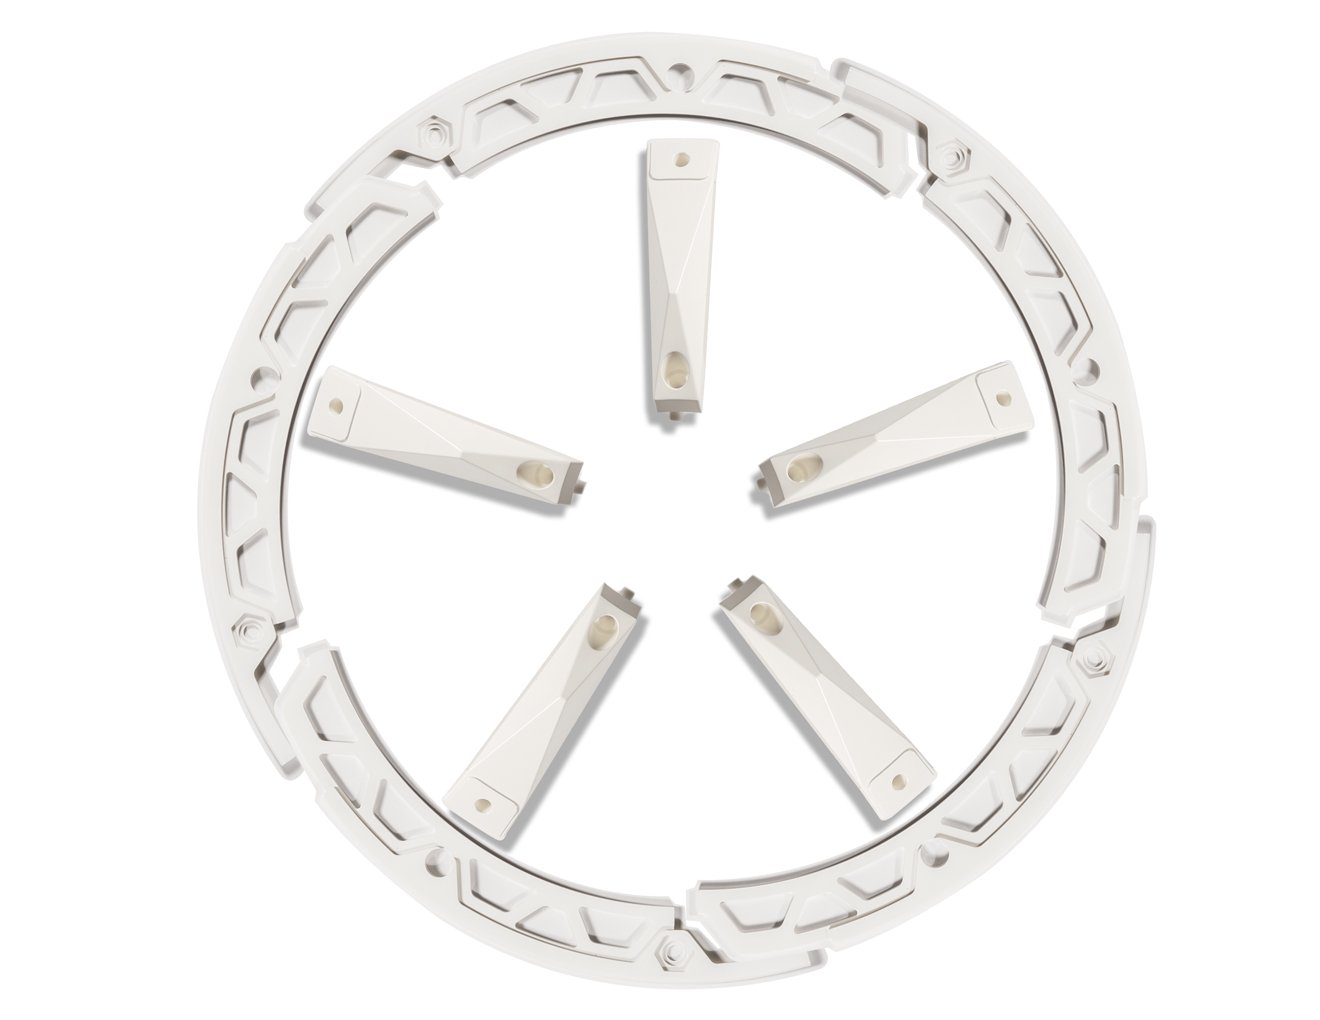 GD04A-Series Wheel Insert, Fits Wheel Size: 17 x 9 in., Direction: Non-Directional [White]